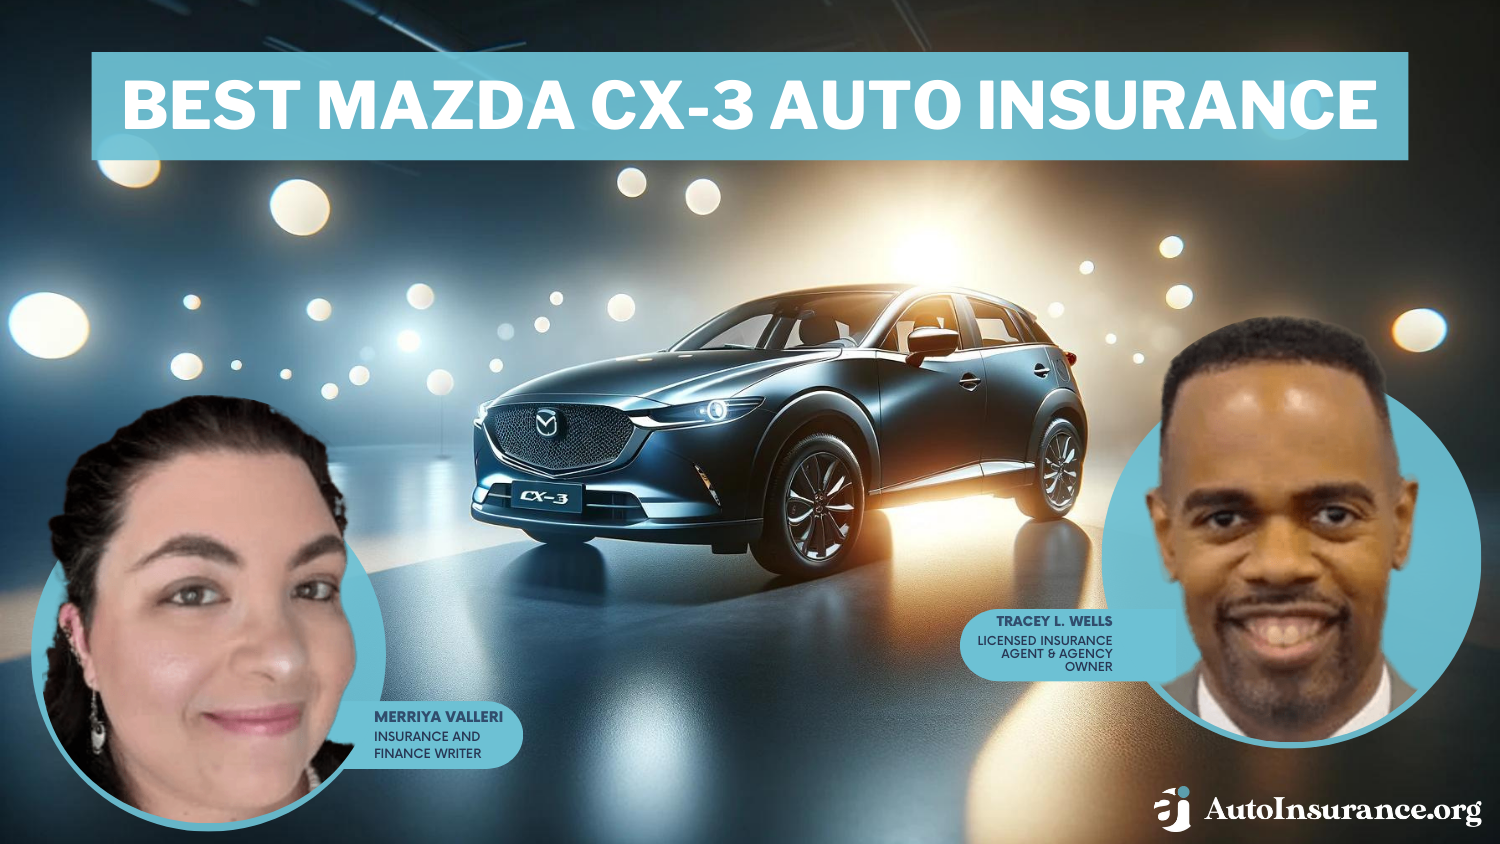 Best Mazda CX-3 Auto Insurance: Nationwide, Farmers, and Amica.